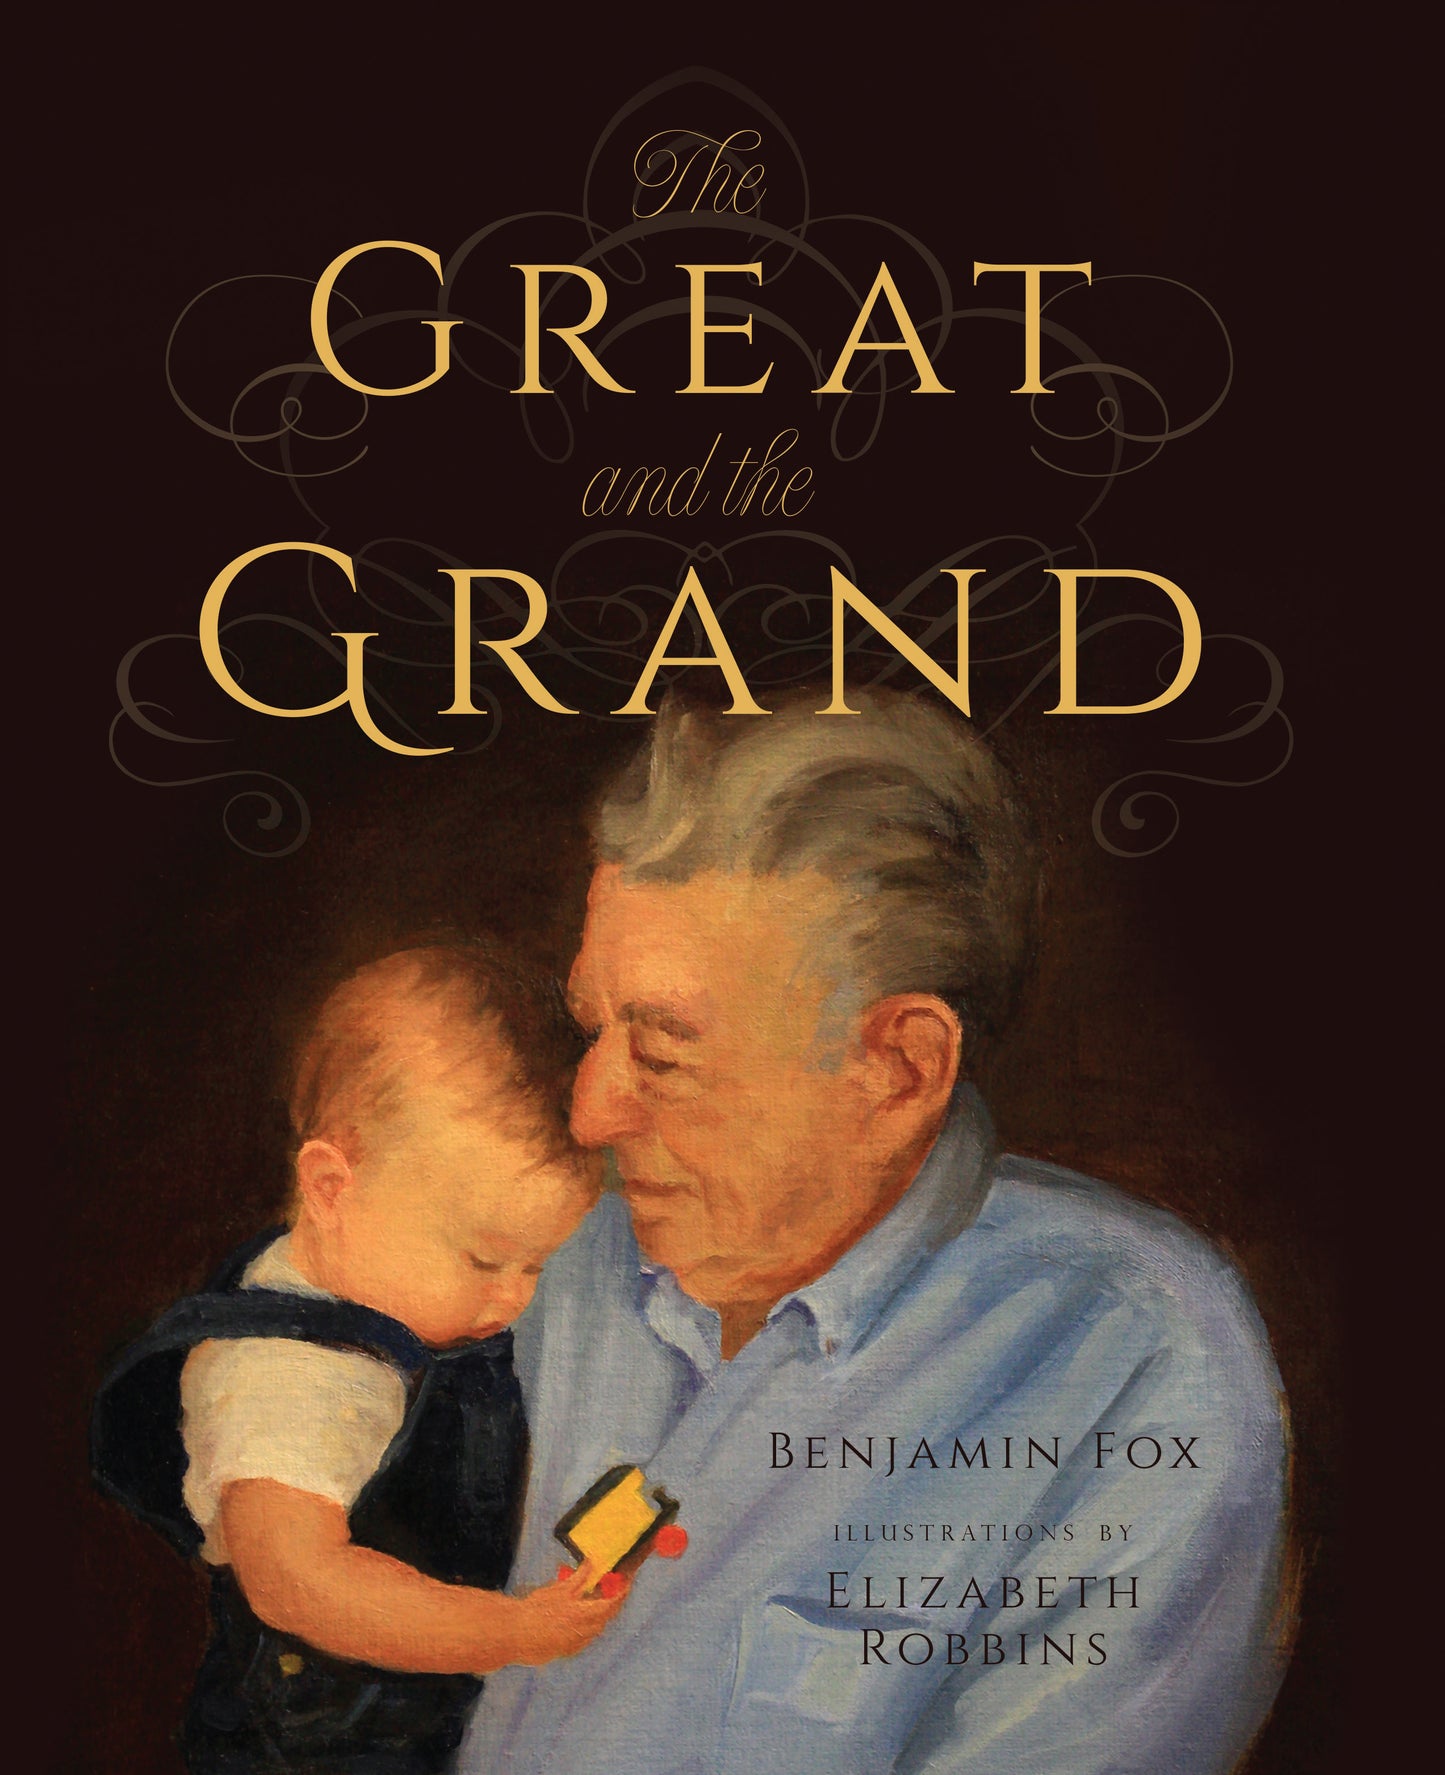 The Great and the Grand - Benjamin Fox